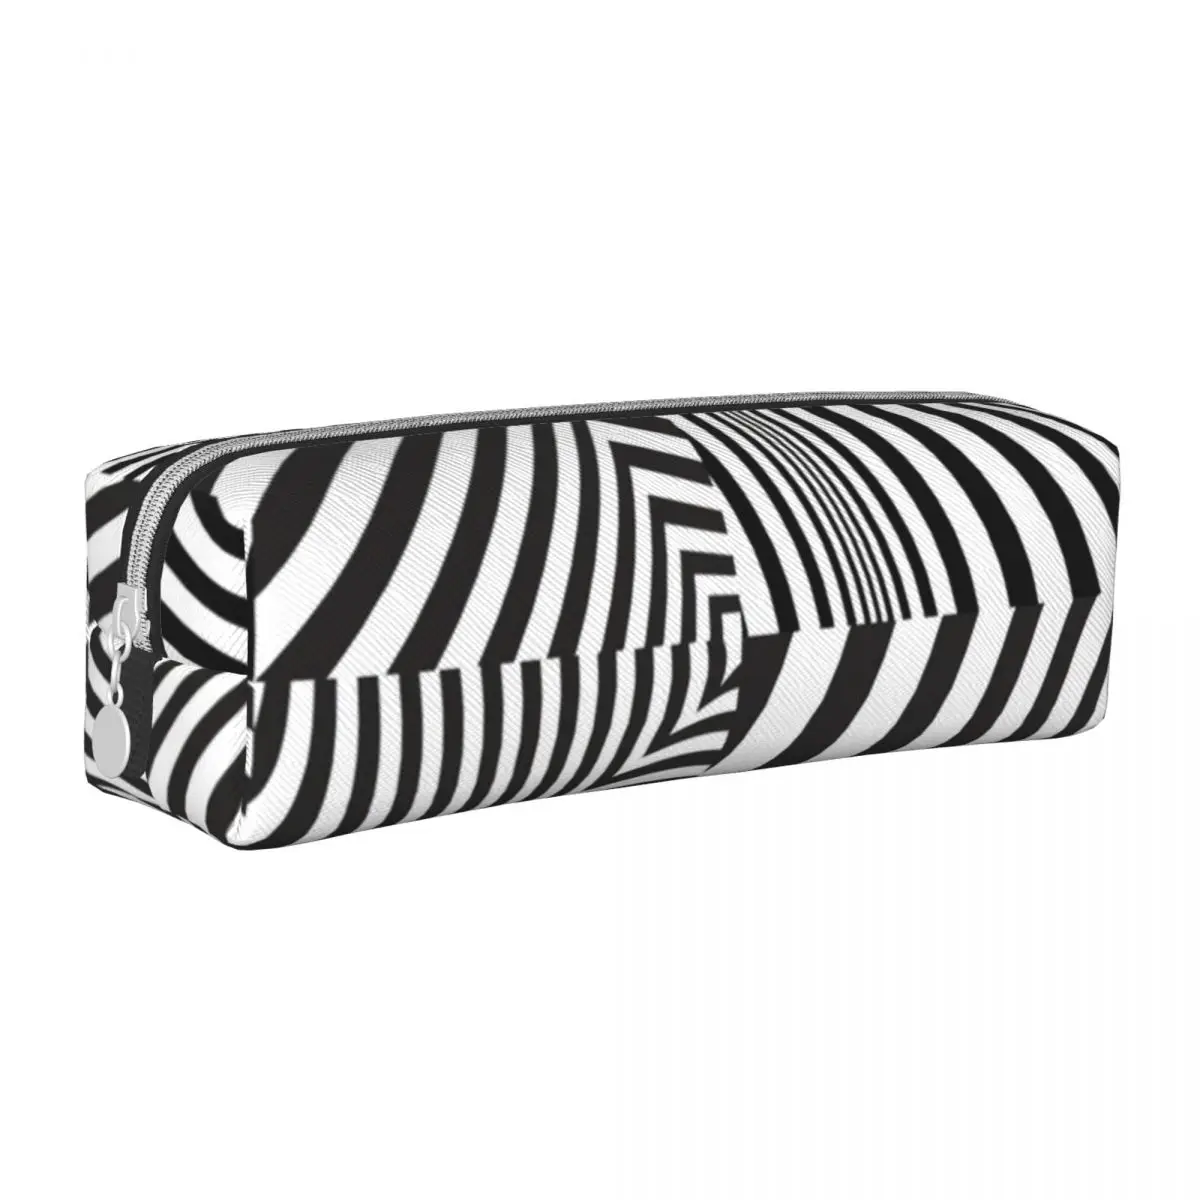 

Retro Mod Squared Square Pencil Case Abstract Stripes Girls Boys Stationery Leather Pencil Box Cool Zipper Pen Pouch